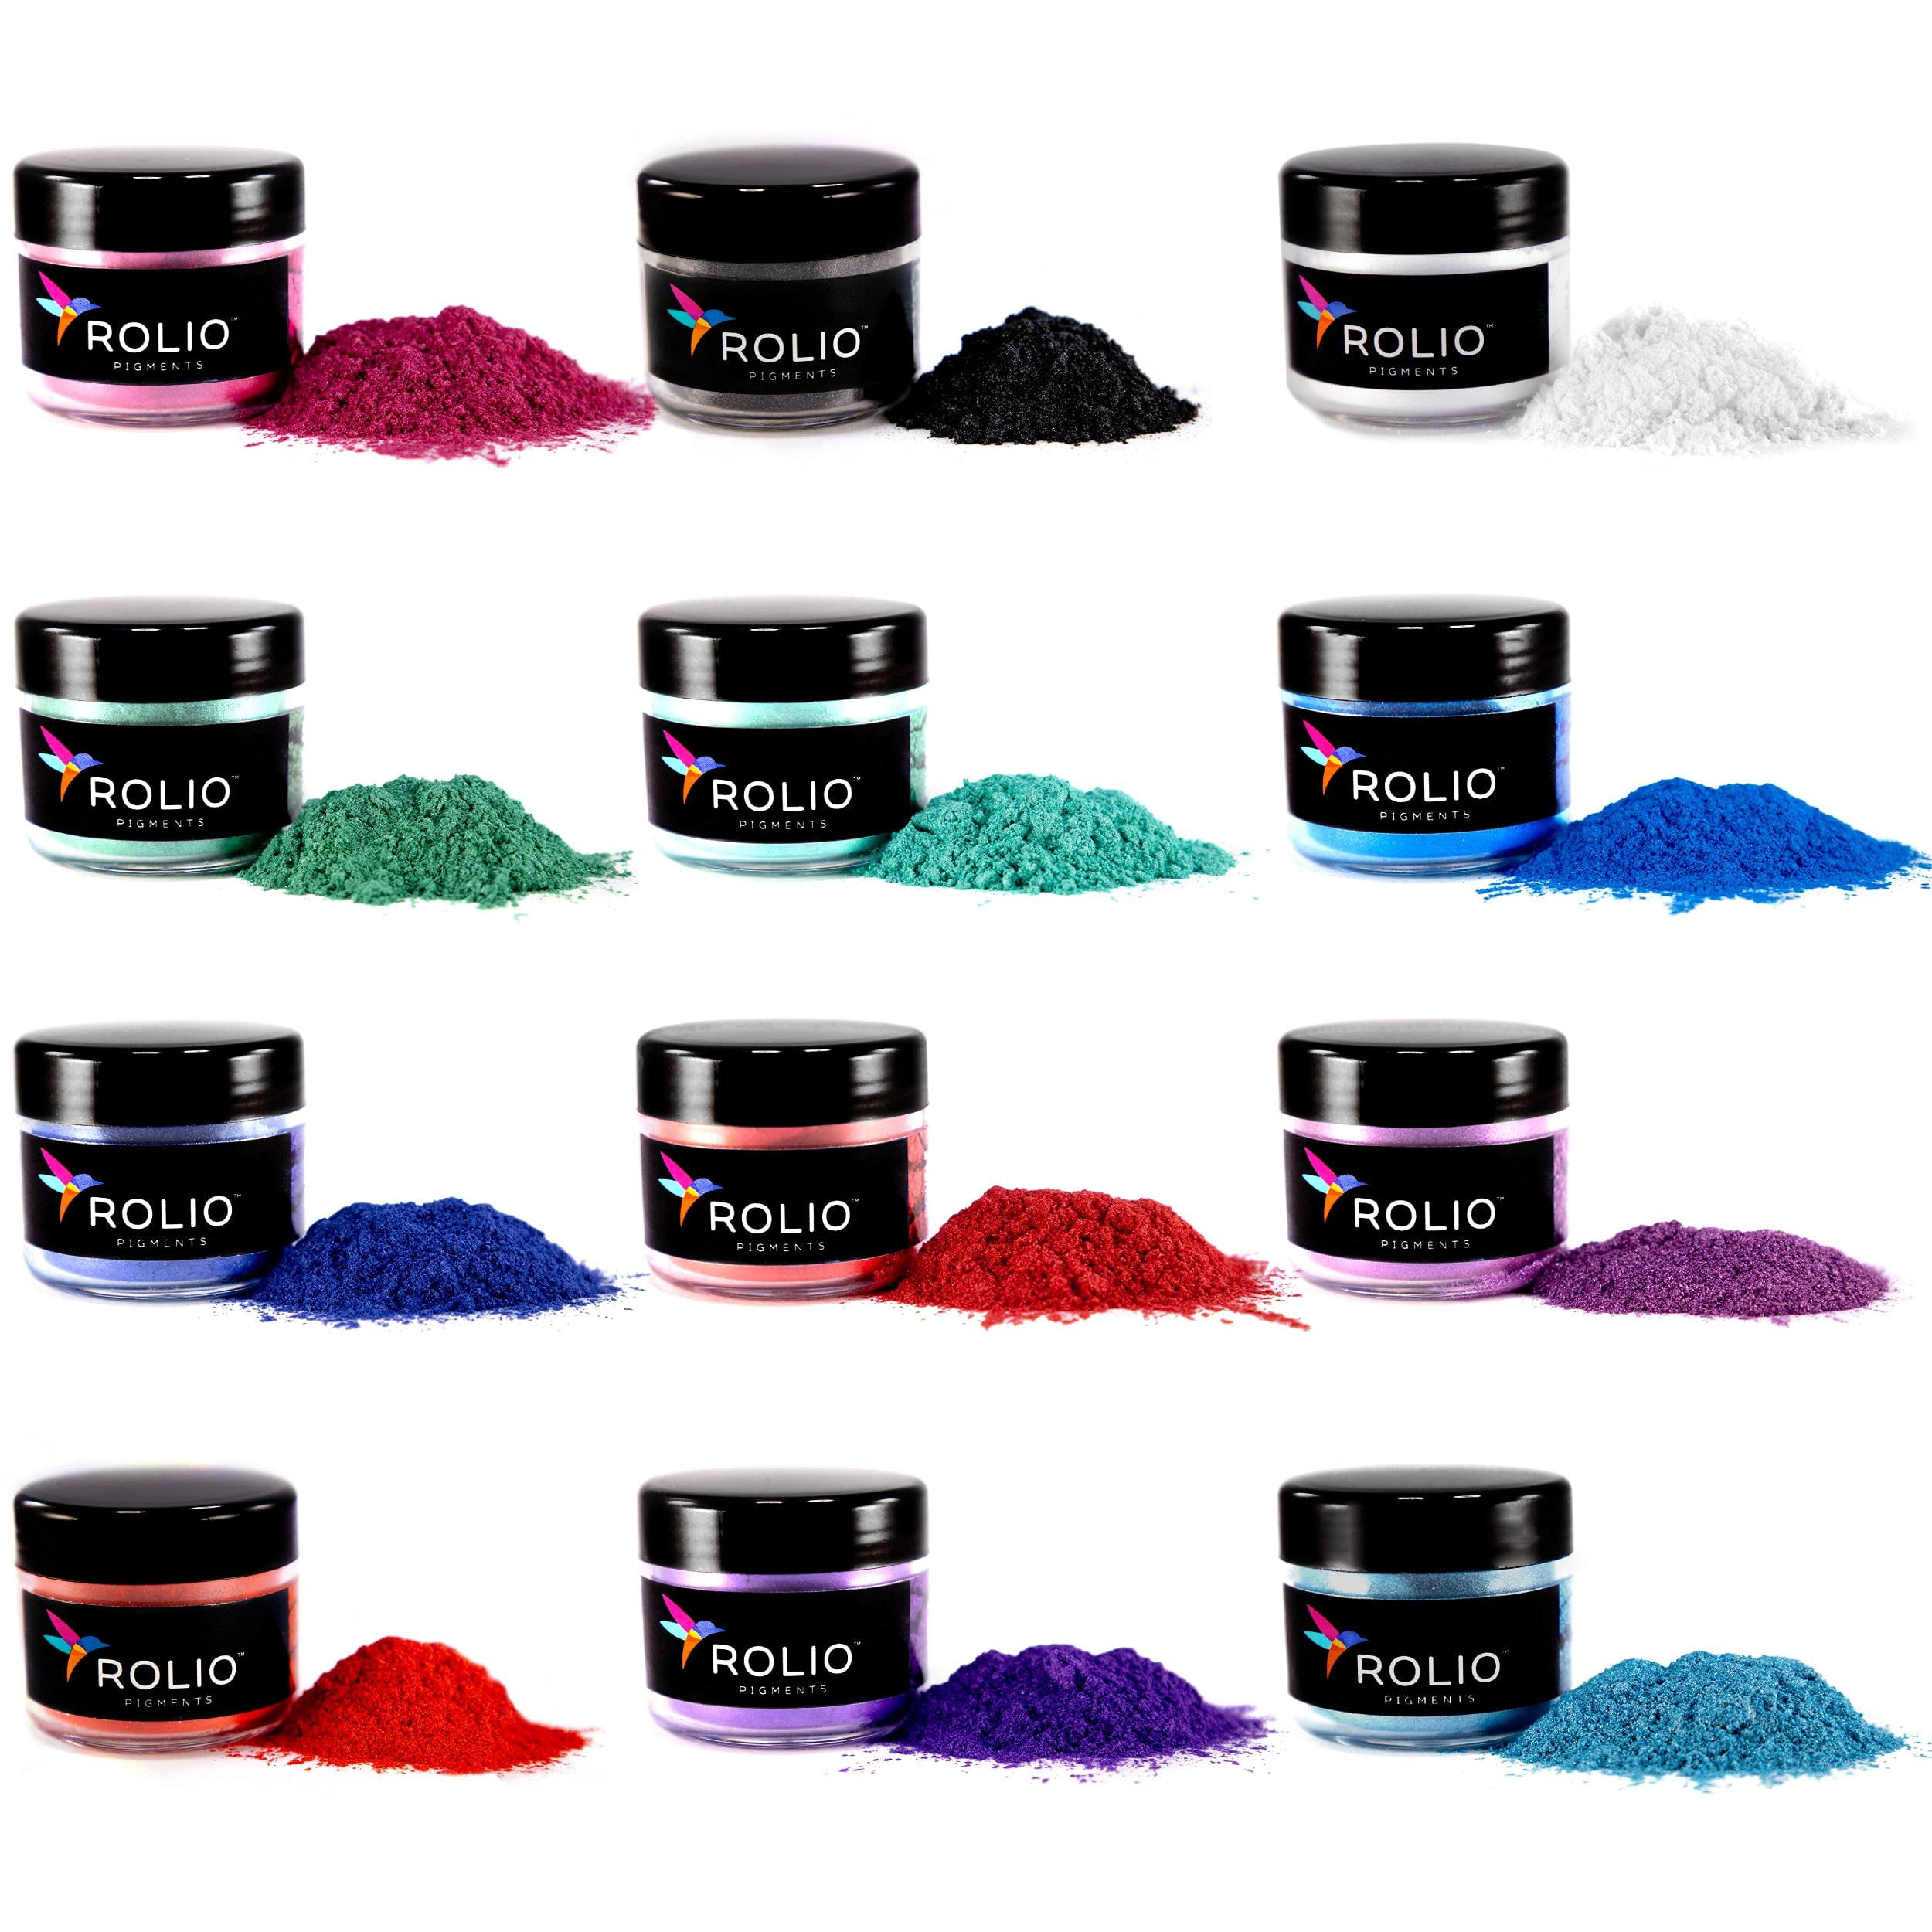 Rolio - Mica Powder - 12 Jars of Pearlescent Color Pigment for Paint, Dye, Soap Making, Nail Polish, Epoxy Resin, Candle Making, Bath Bombs, Slime 